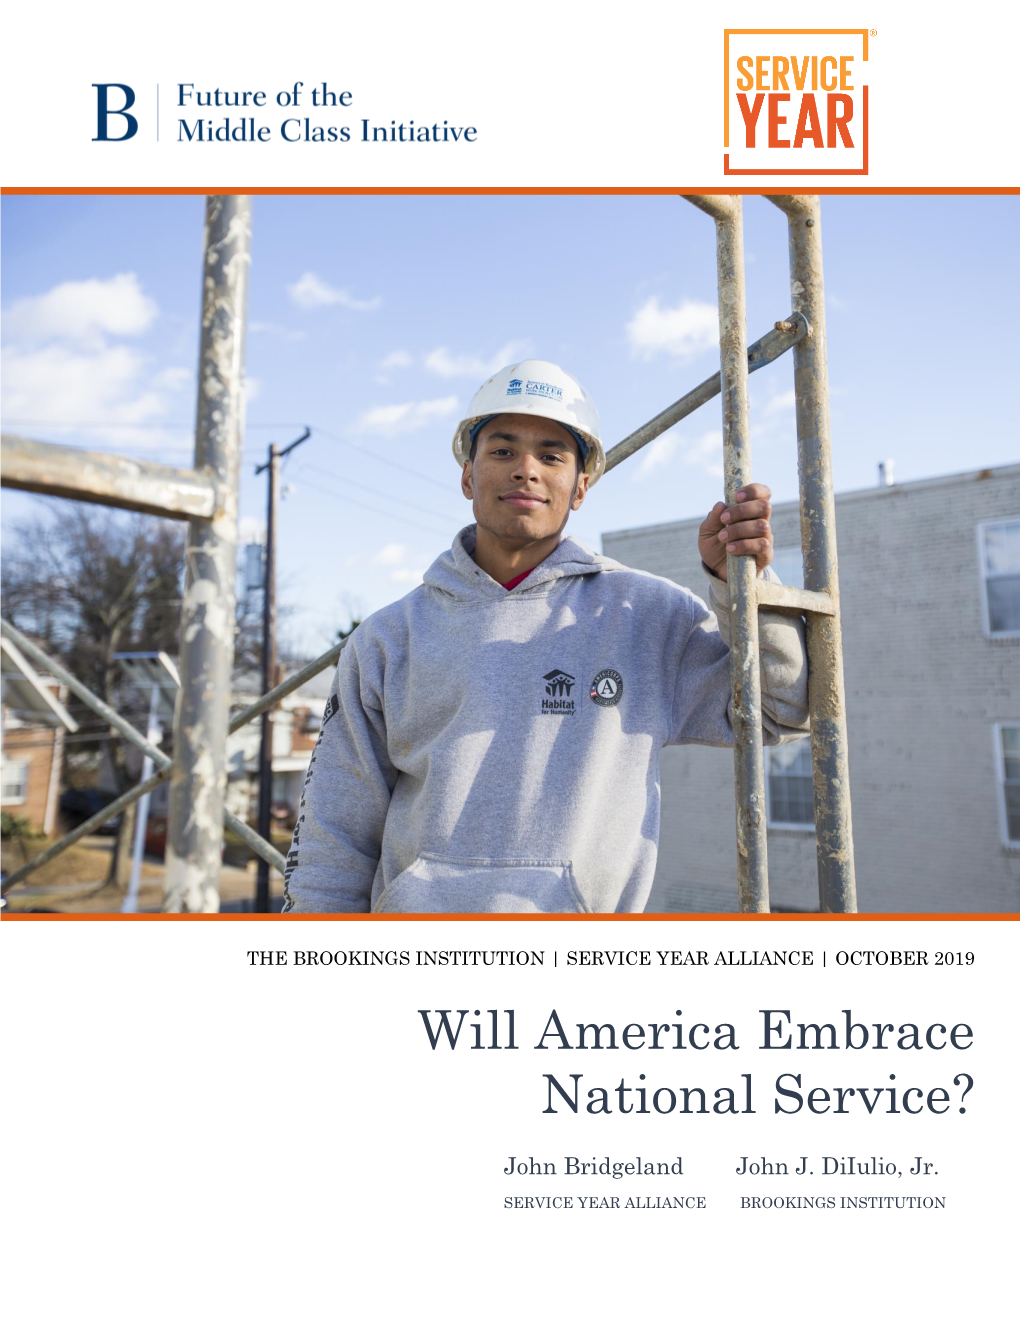 Will America Embrace National Service?